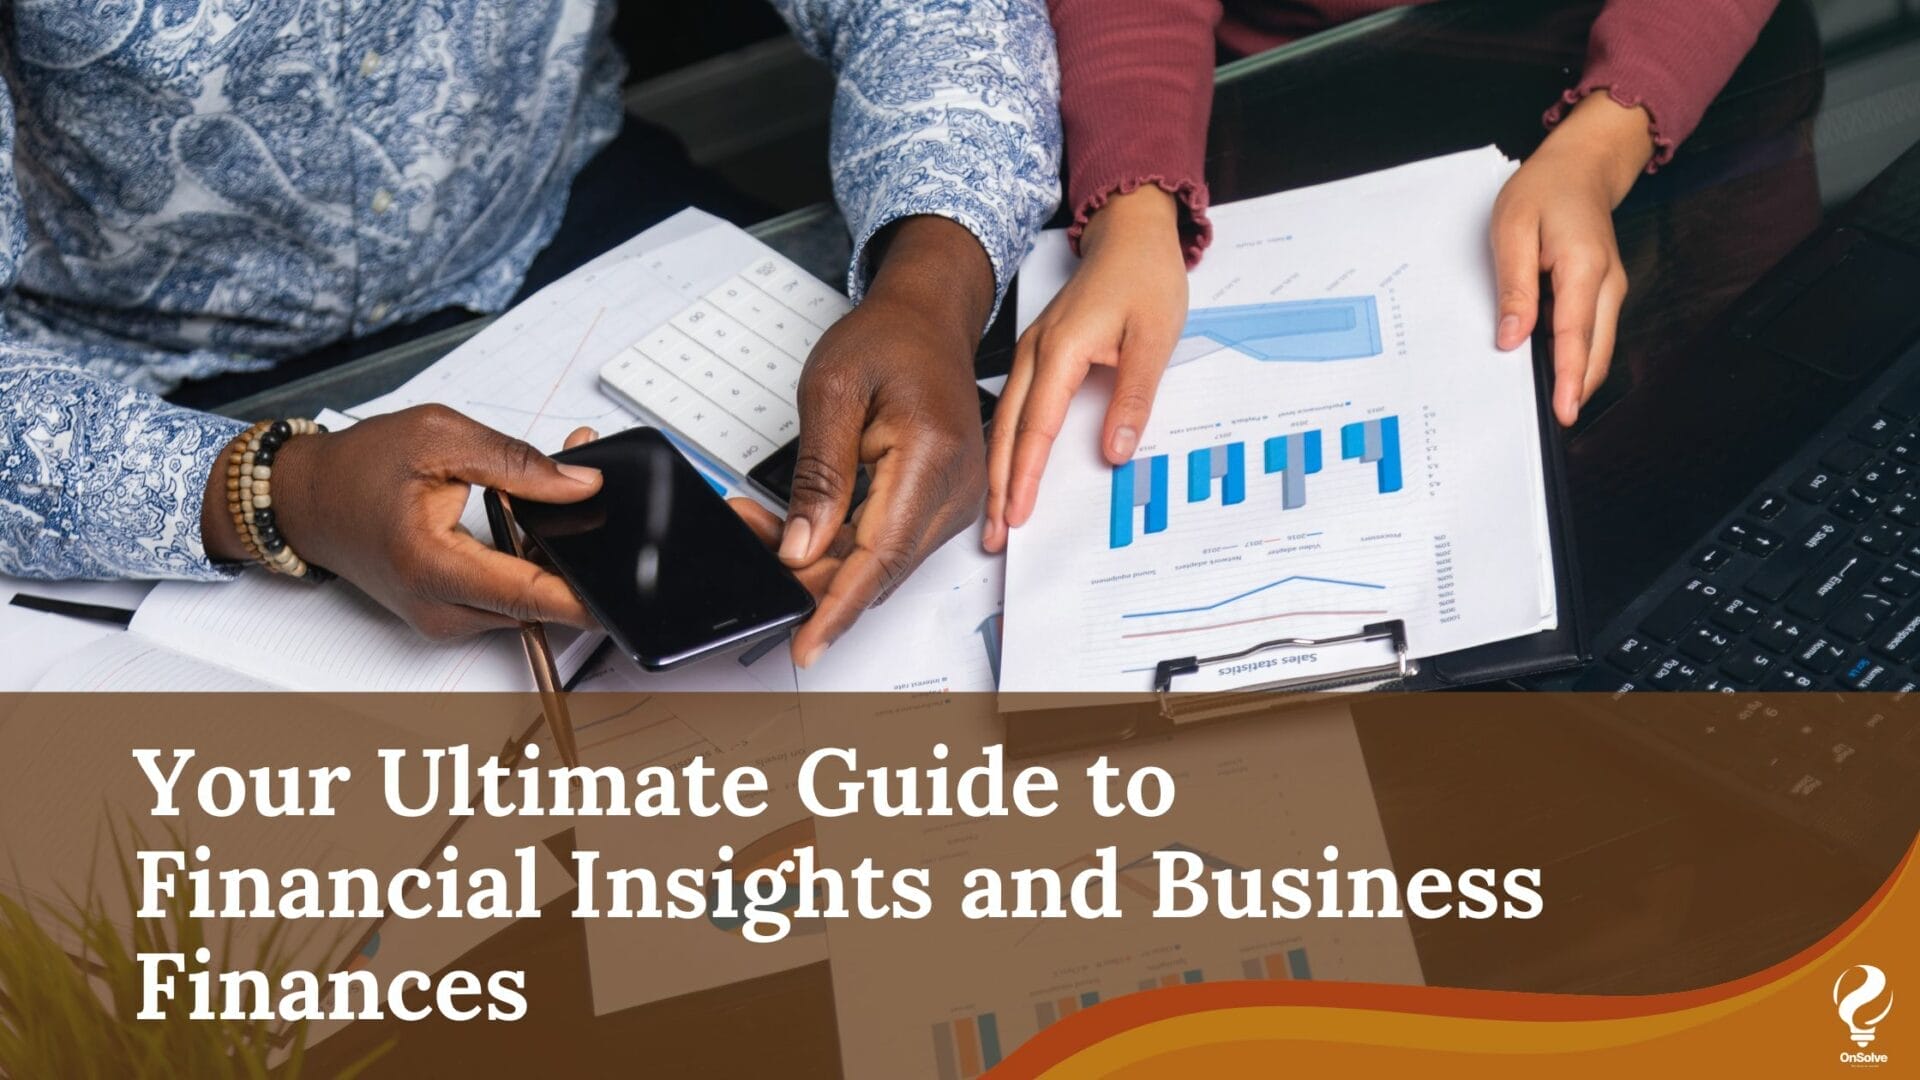 Your Ultimate Guide to Financial Insights and Business Finances